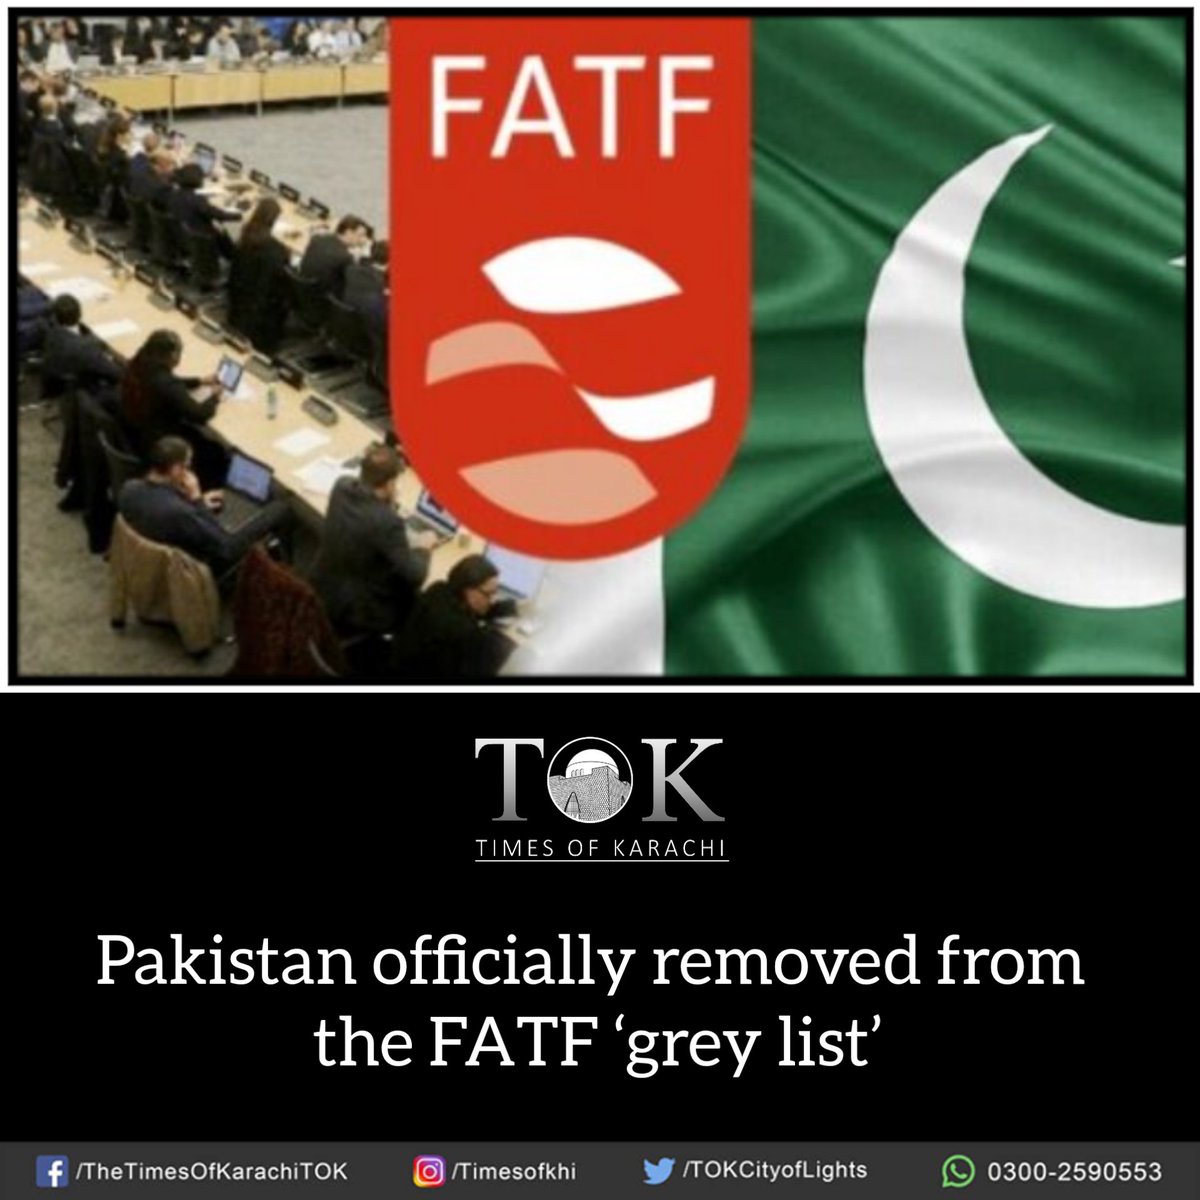 JUST IN: The Financial Action Task Force (FATF) — the world's money laundering and terror-financing watchdog — said that #Pakistan has been removed from the grey list and is no longer subject to its increased monitoring process. #FATF #TOKAlert